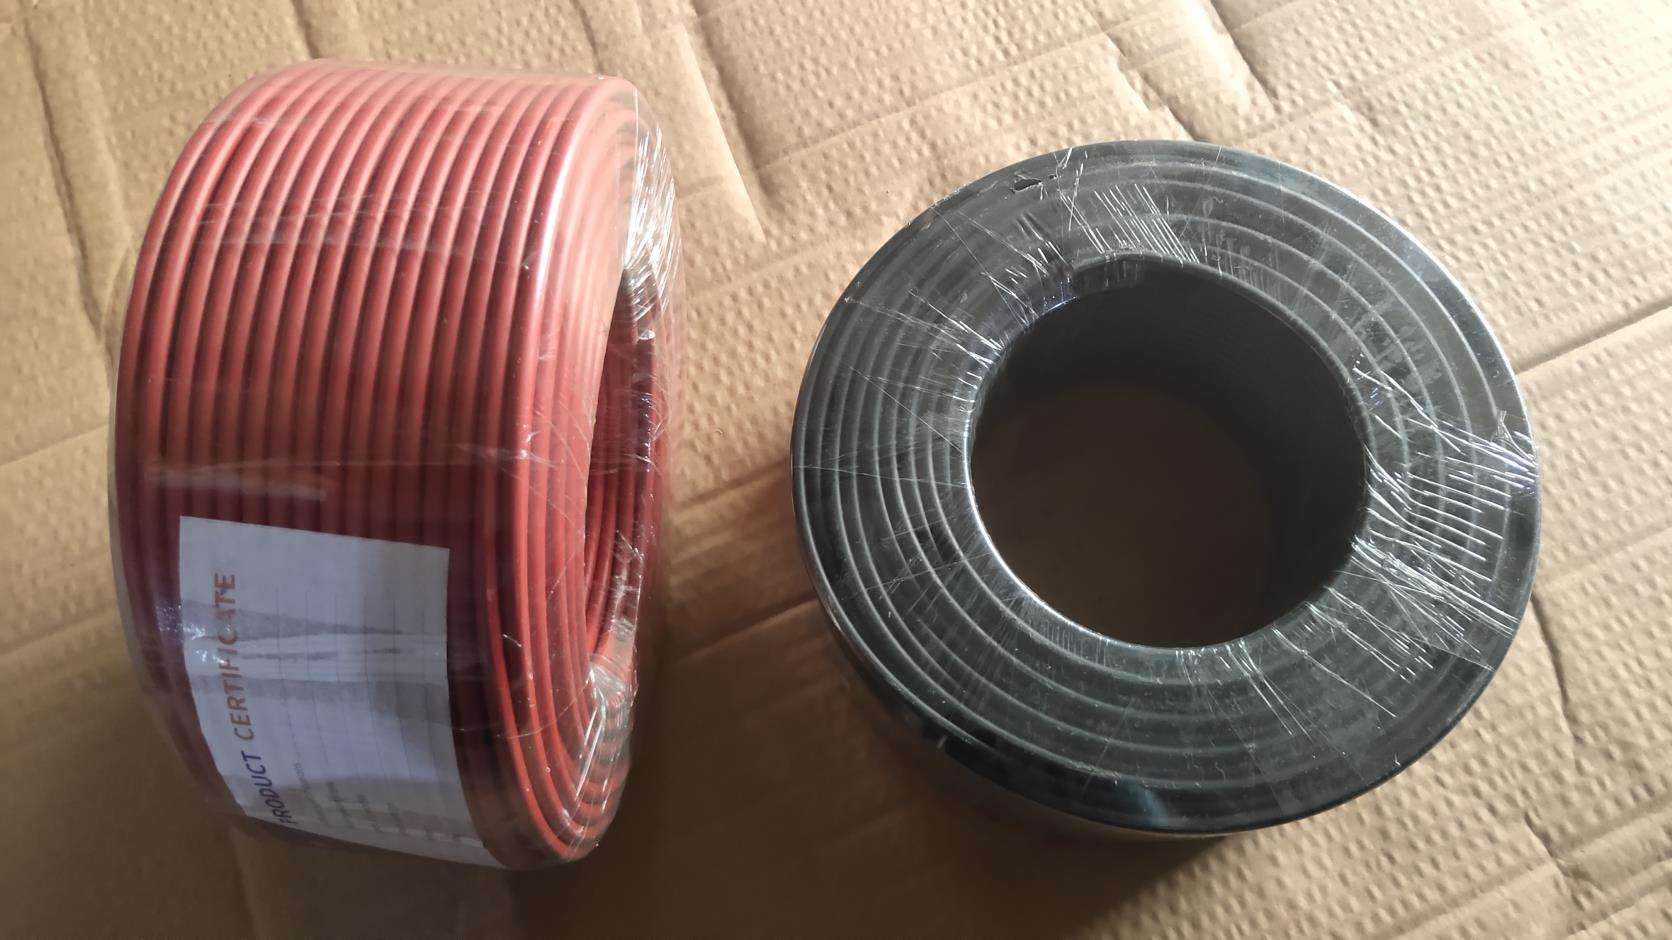 customized 4mm Standard Twin Core Cable automotive wire